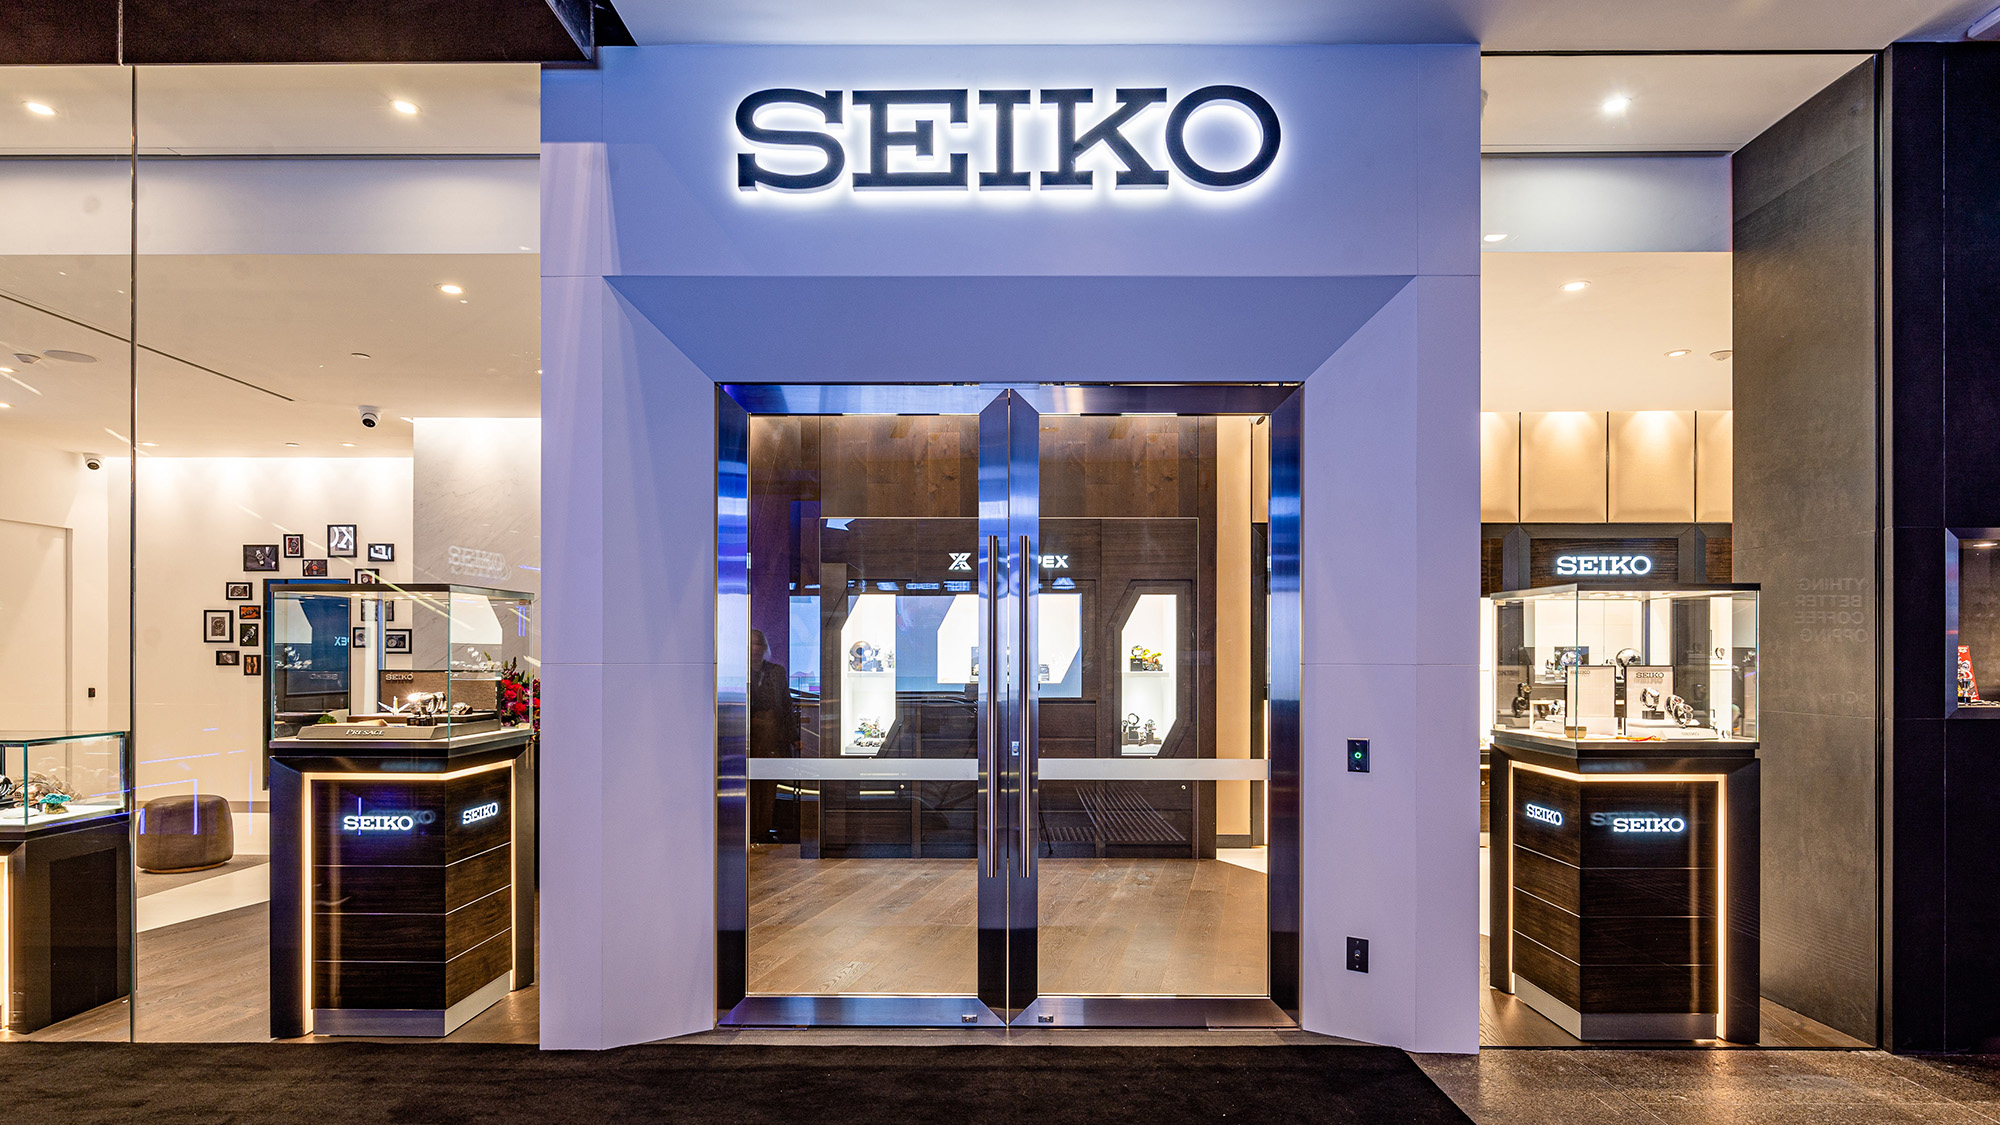 Seiko Re-Opens Its at MidCity Seiko Watch Corporation